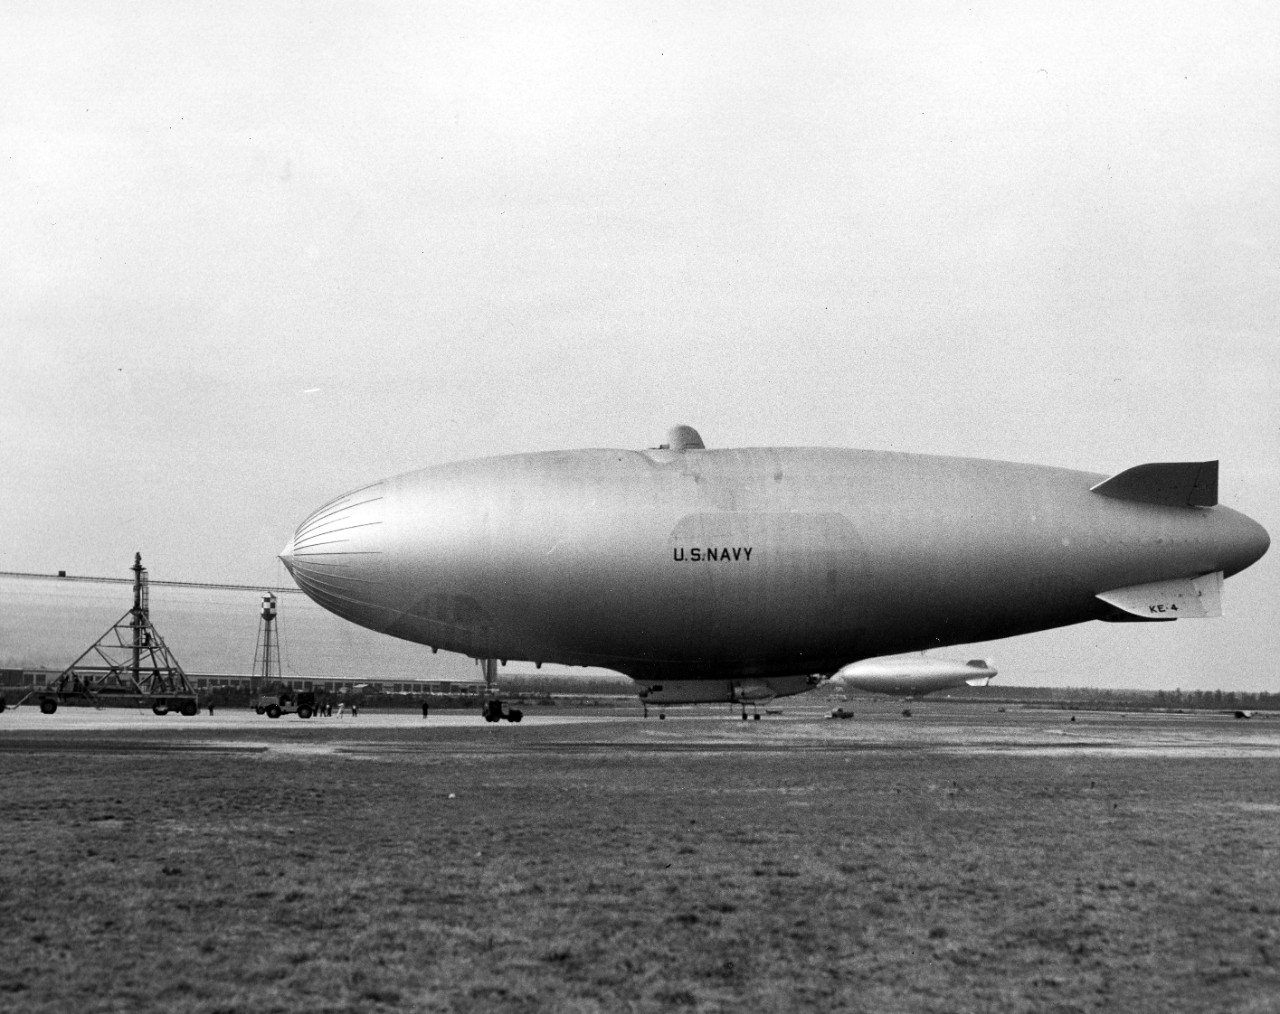 <p>World’s largest airship the US Navy’s “Reliance” backs from its mooring prior to take-off from the world’s only military operational lighter-than-air base, Naval Air Station Lakehurst, New Jersey, circa 1960.</p>
